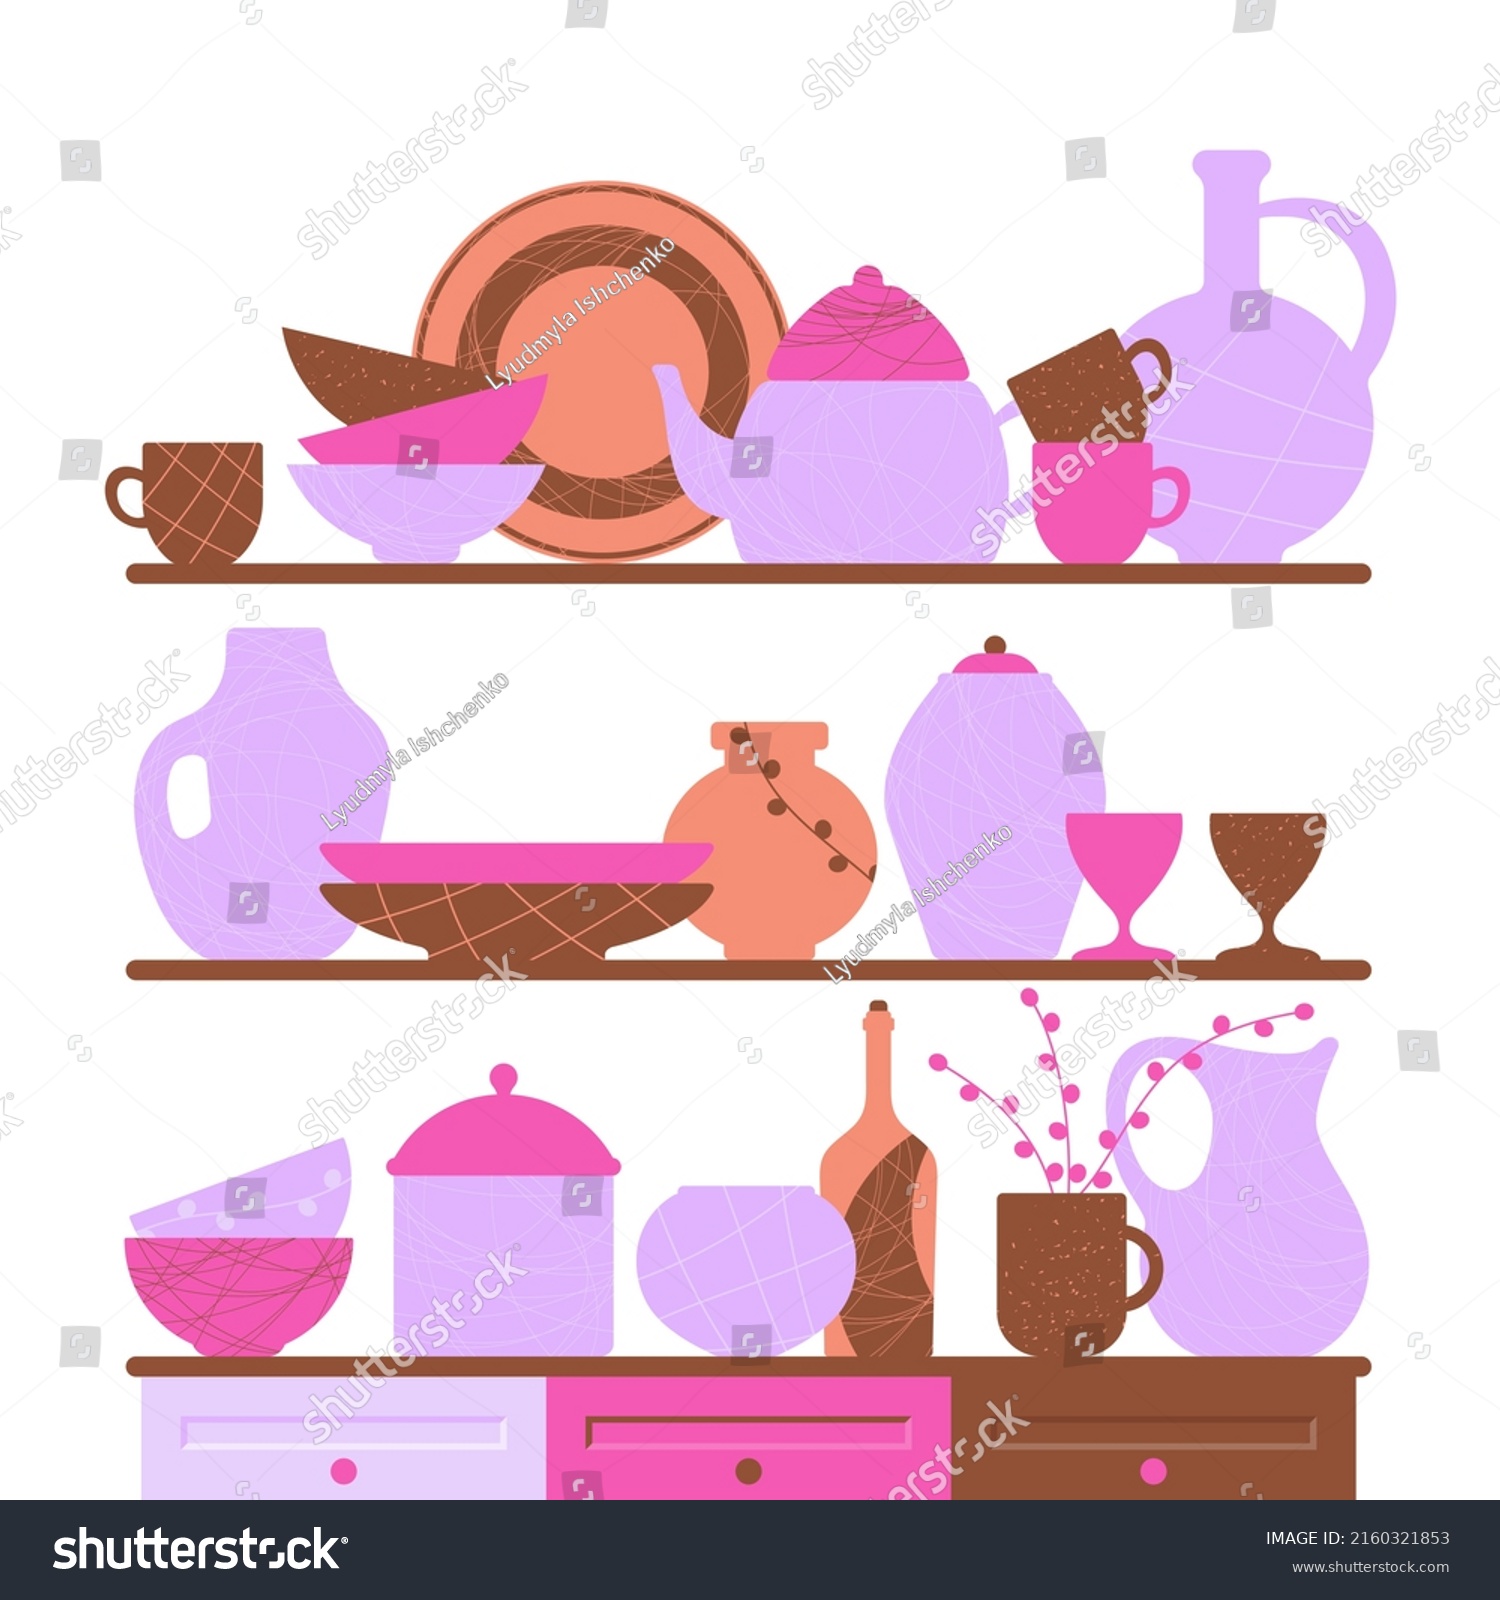 Stock Vector Set Of Kitchen Utensils Cute Flat Vector Illustration Collection Of Bowls Plates Vases Dishes 2160321853 